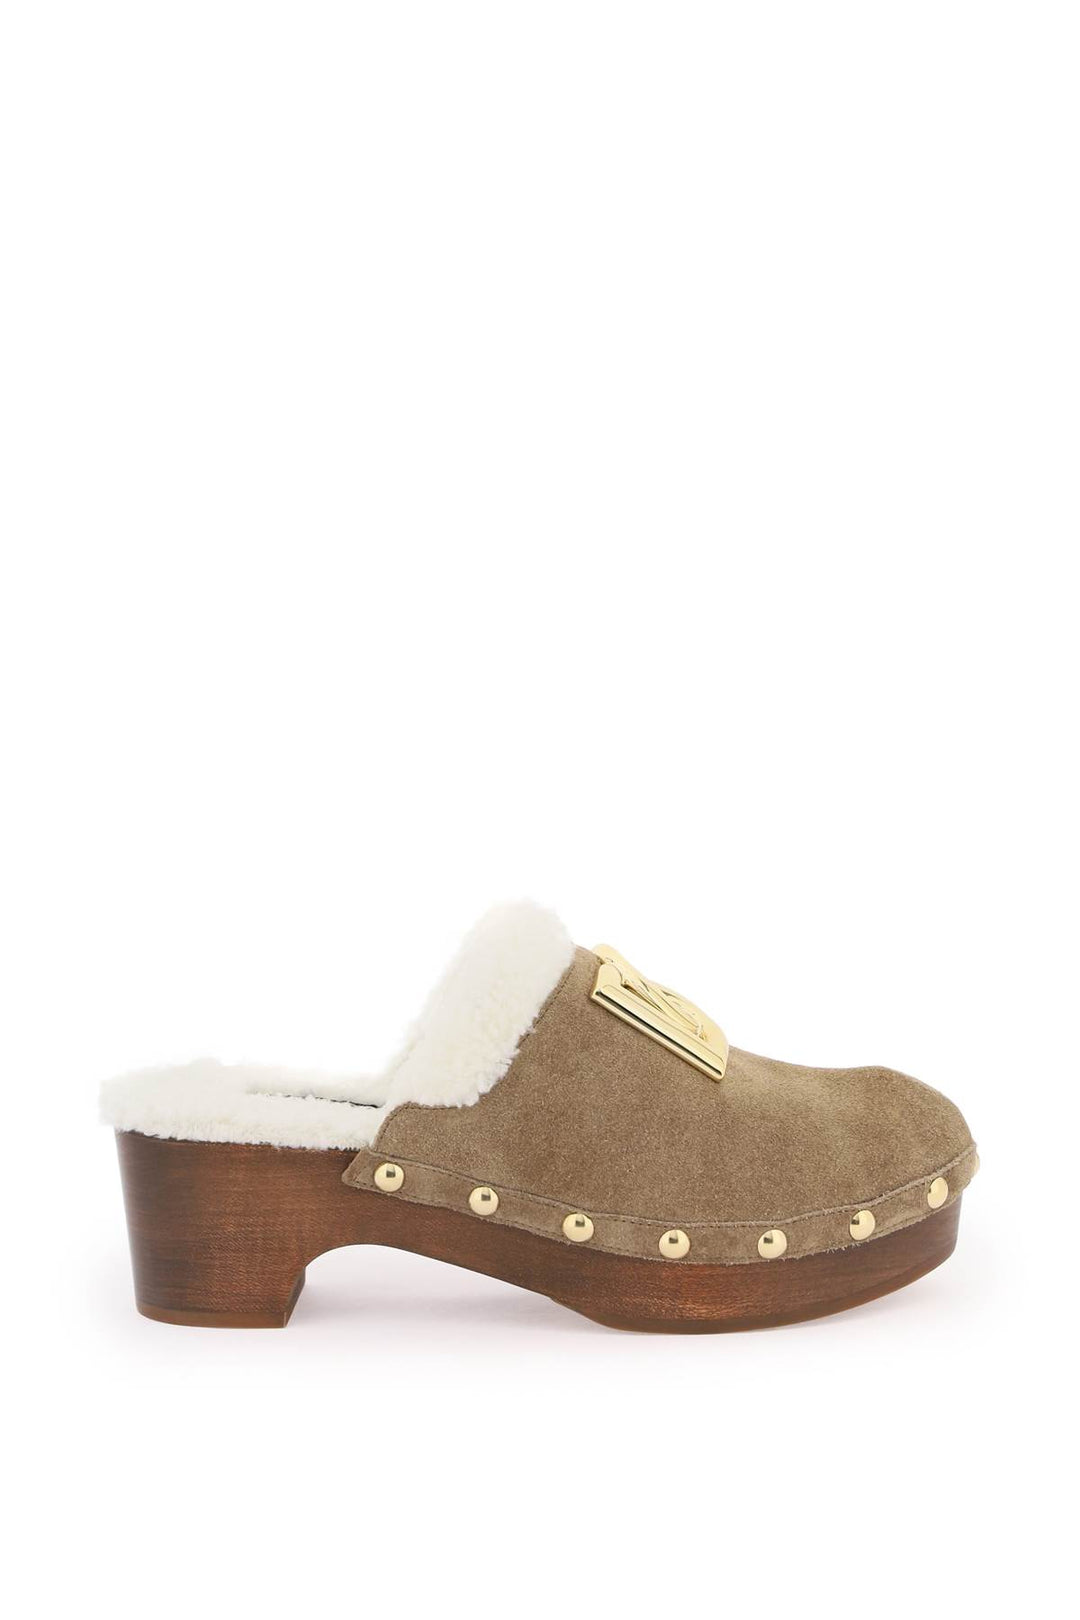 Dolce & gabbana suede and faux fur clogs with dg logo.-0